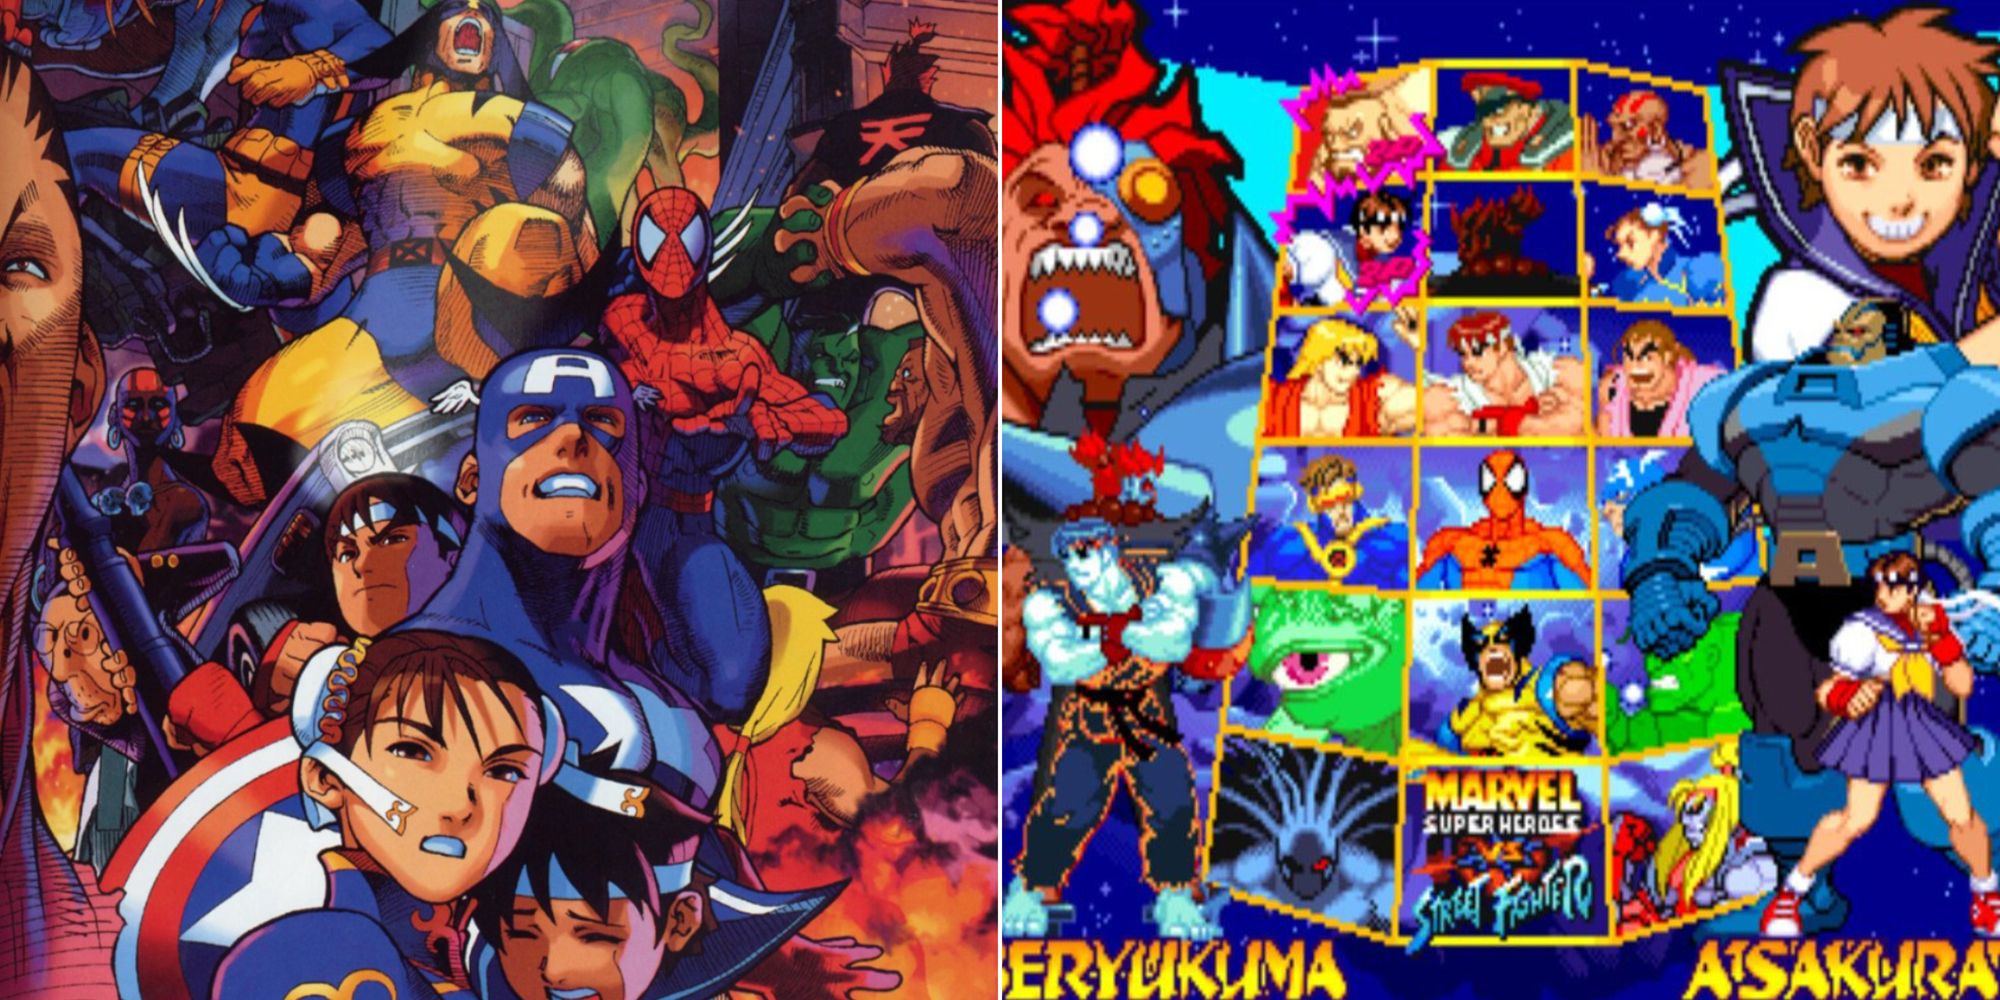 Marvel Super Heroes Vs. Street Fighter character select